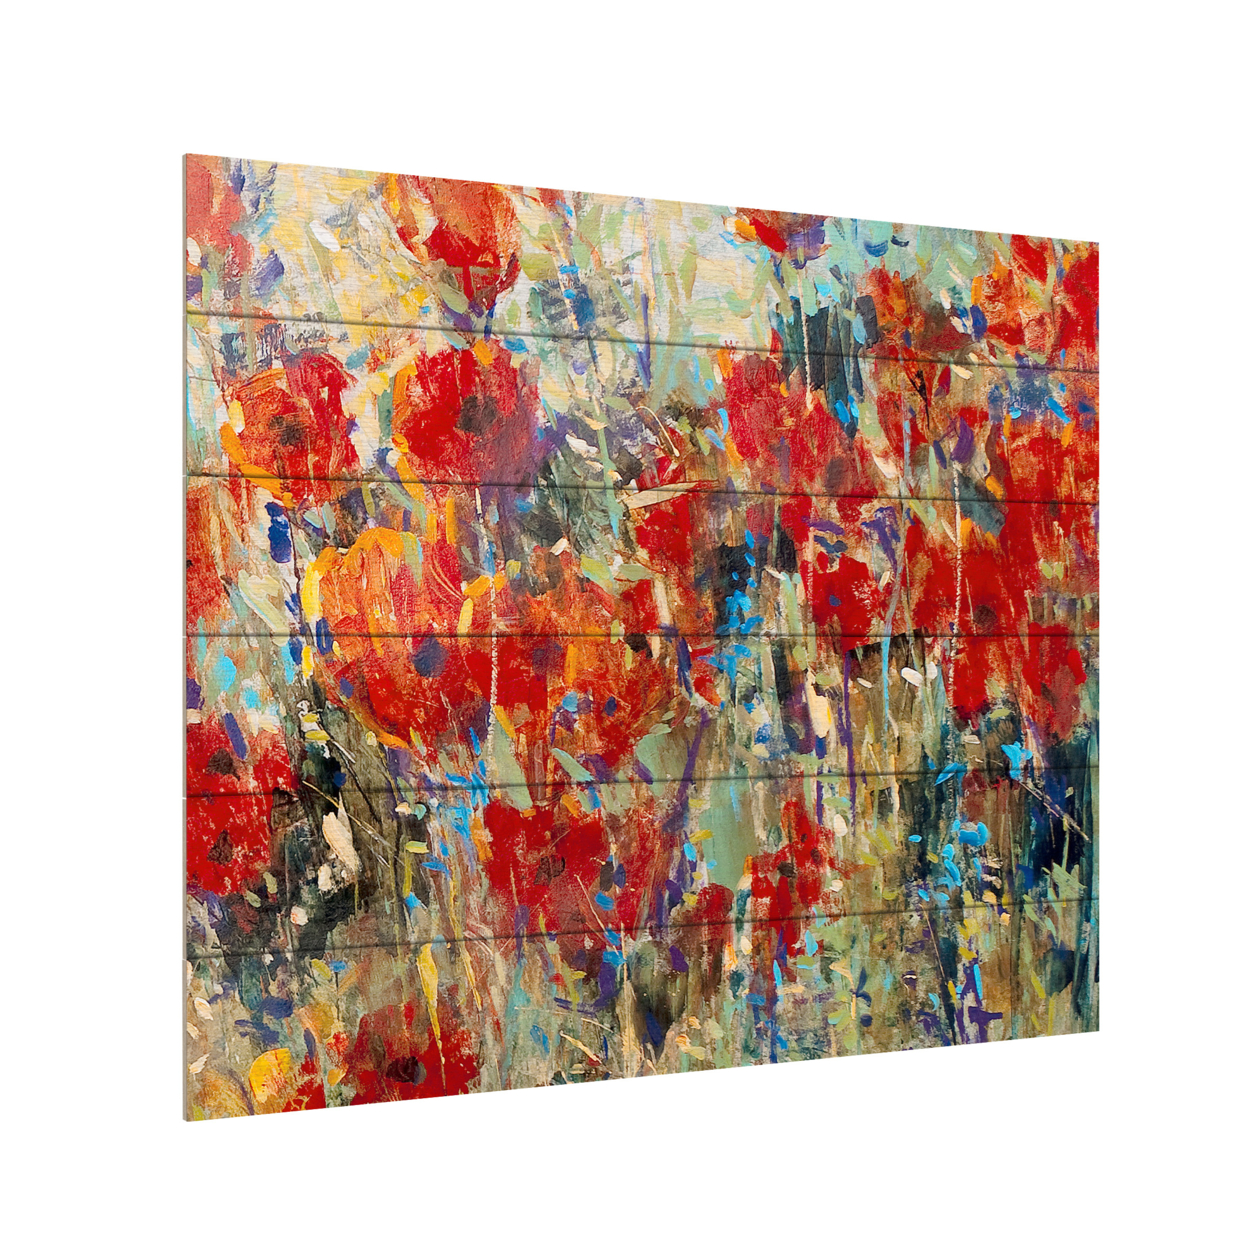 Wooden Slat Art 18 X 22 Inches Titled Red Poppy Field Ii Ready To Hang Home Decor Picture